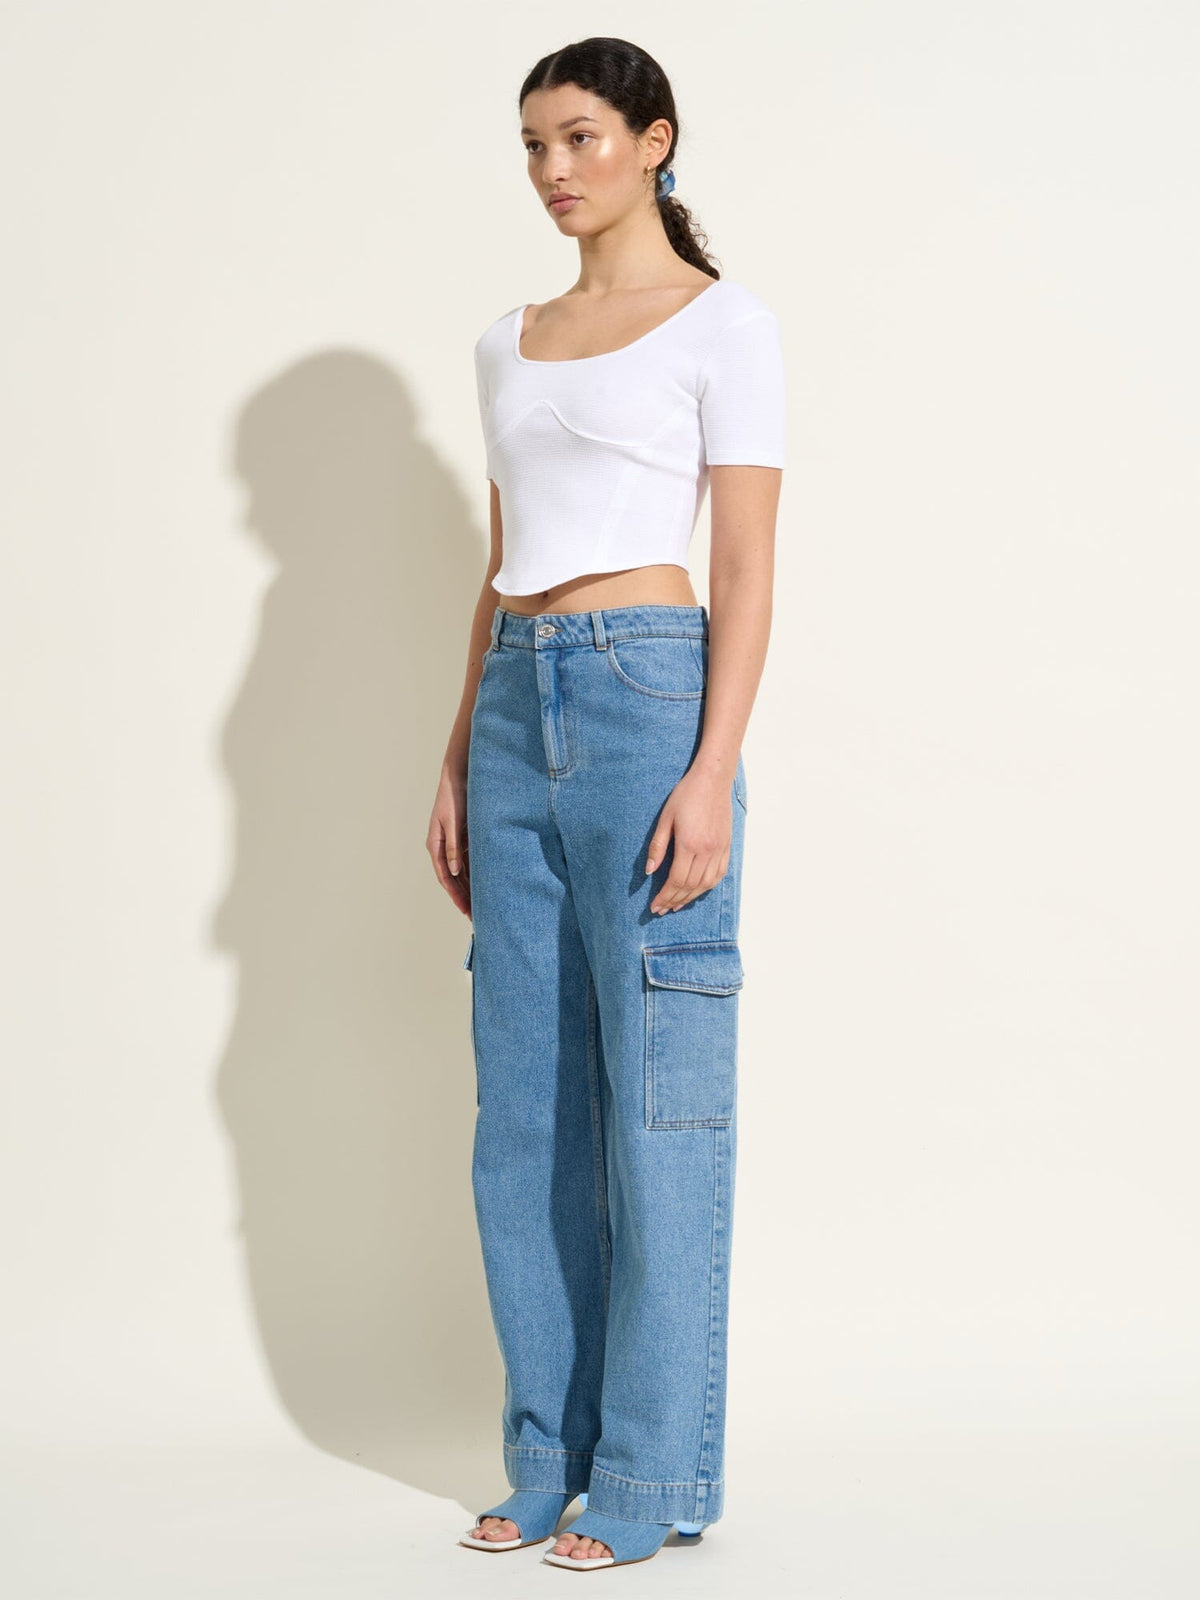 EUCLIDE - Corset-style cropped top in organic piqué jersey Cotton White Top Fête Impériale